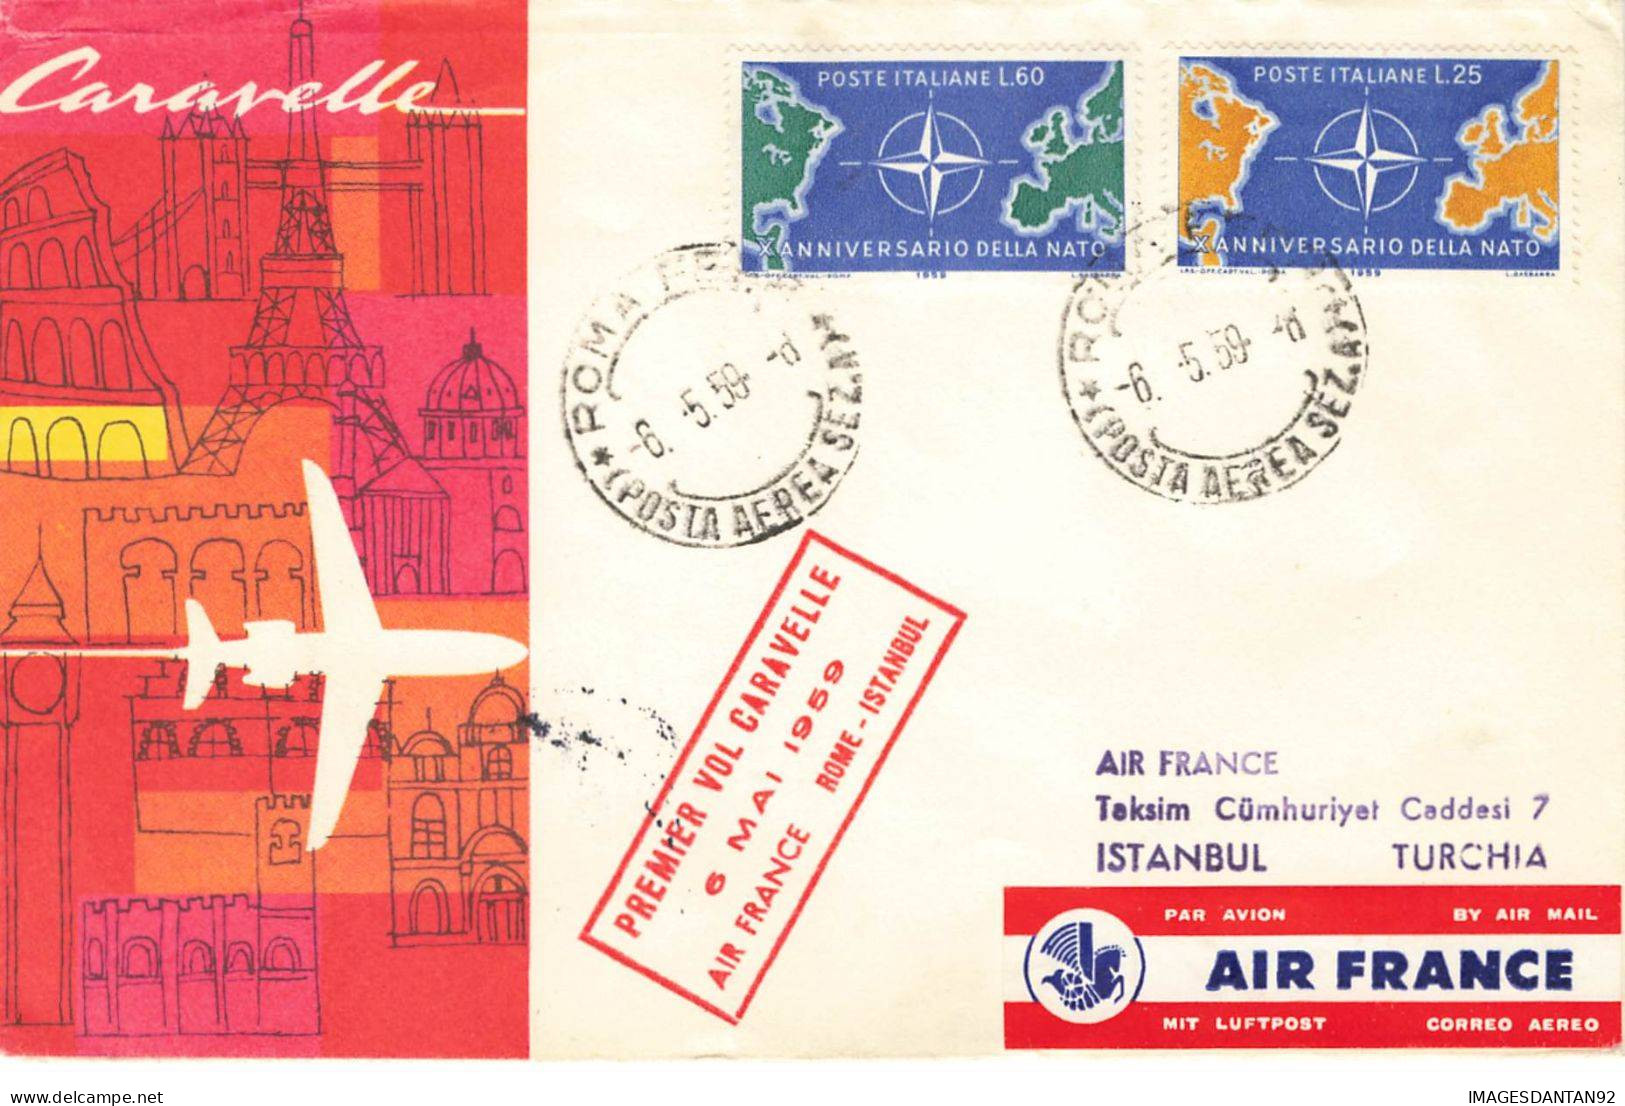 FRANCE #36360 AIR FRANCE PRMIERE BOL CARAVELLE ROME ISTANBUL 1959 - Covers & Documents